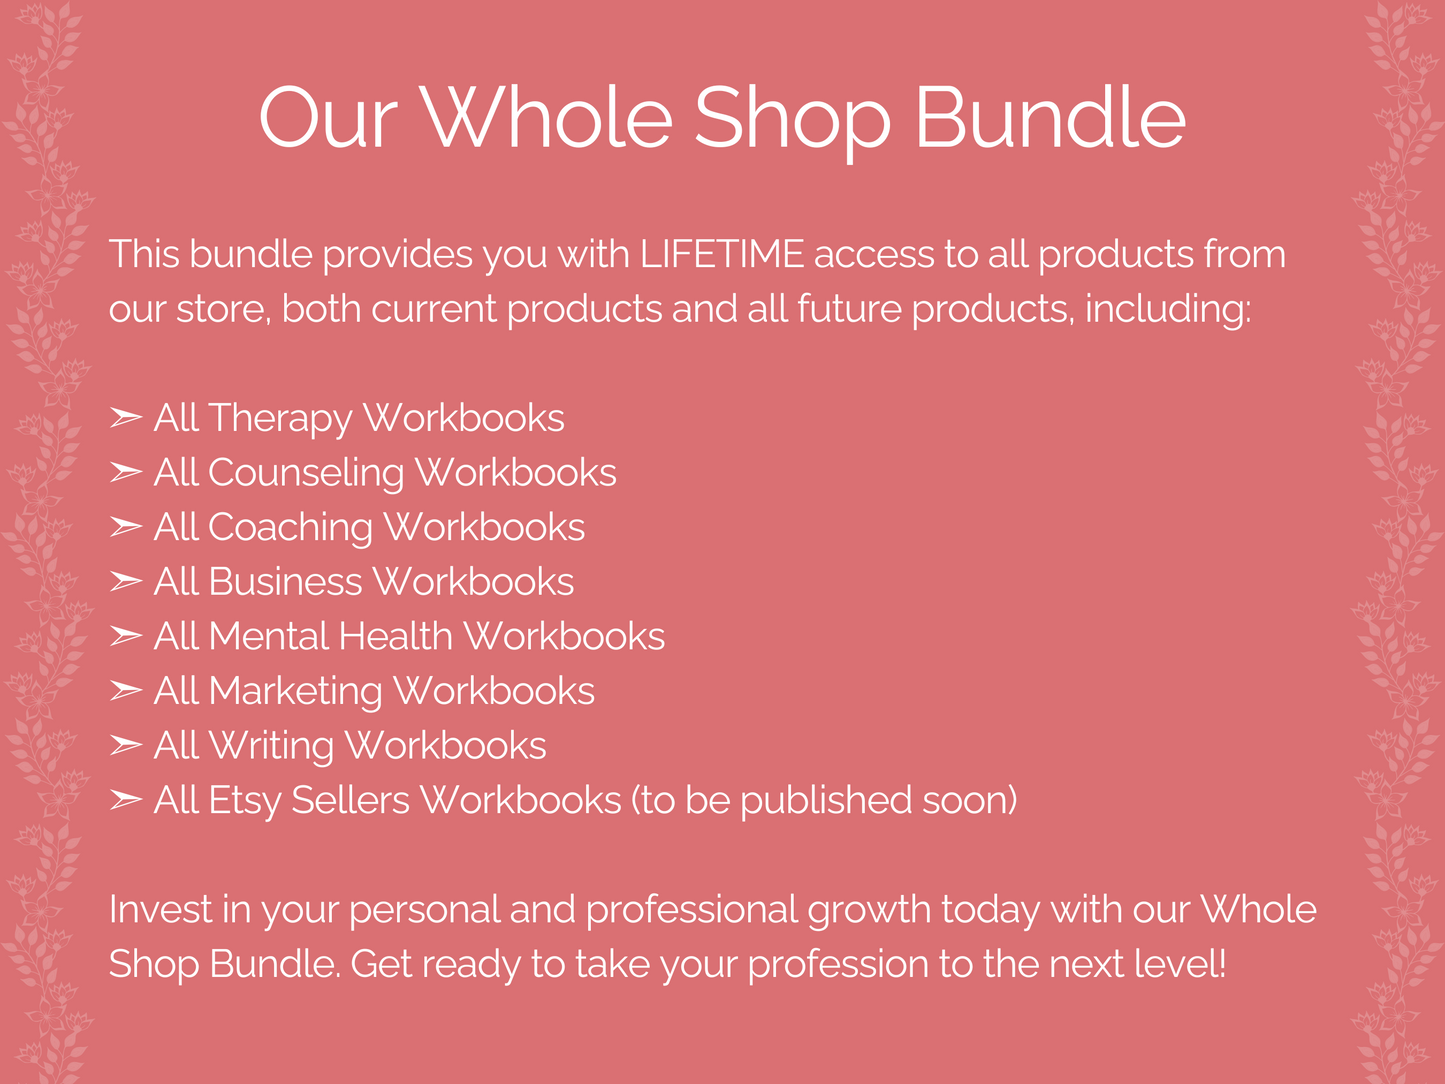 bundle, worksheet, workbook, therapy, counseling, mental health, coaching, marketing, resource, business, writing, template, tool